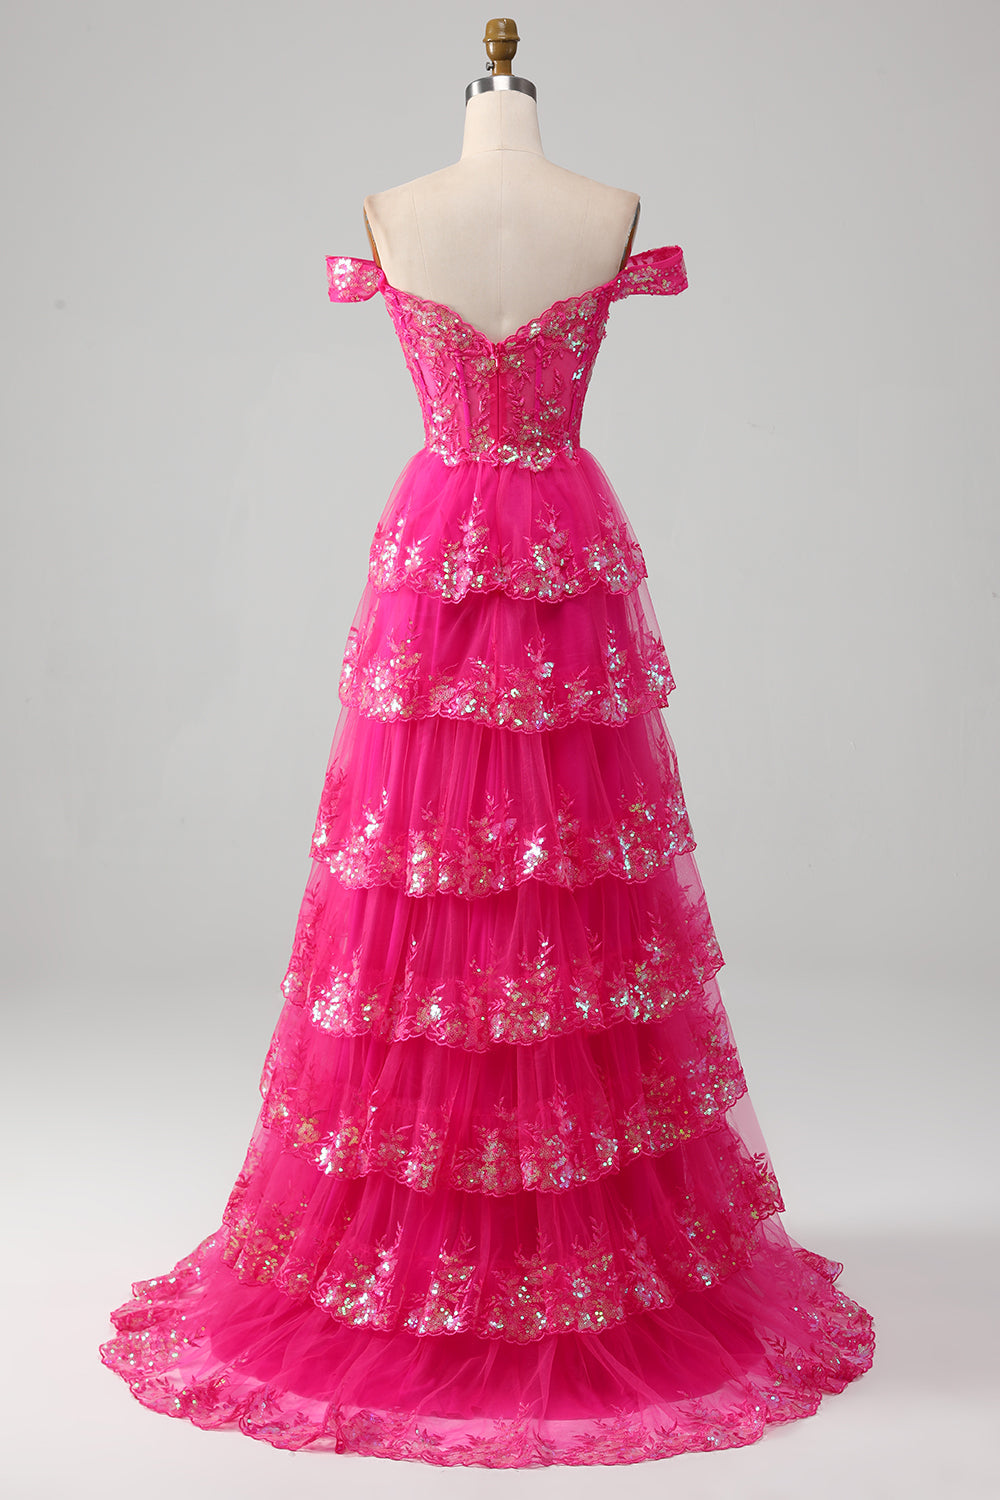 Fuchsia A-Line Off The Shoulder Sparkly Sequin Tiered Prom Dress With Slit